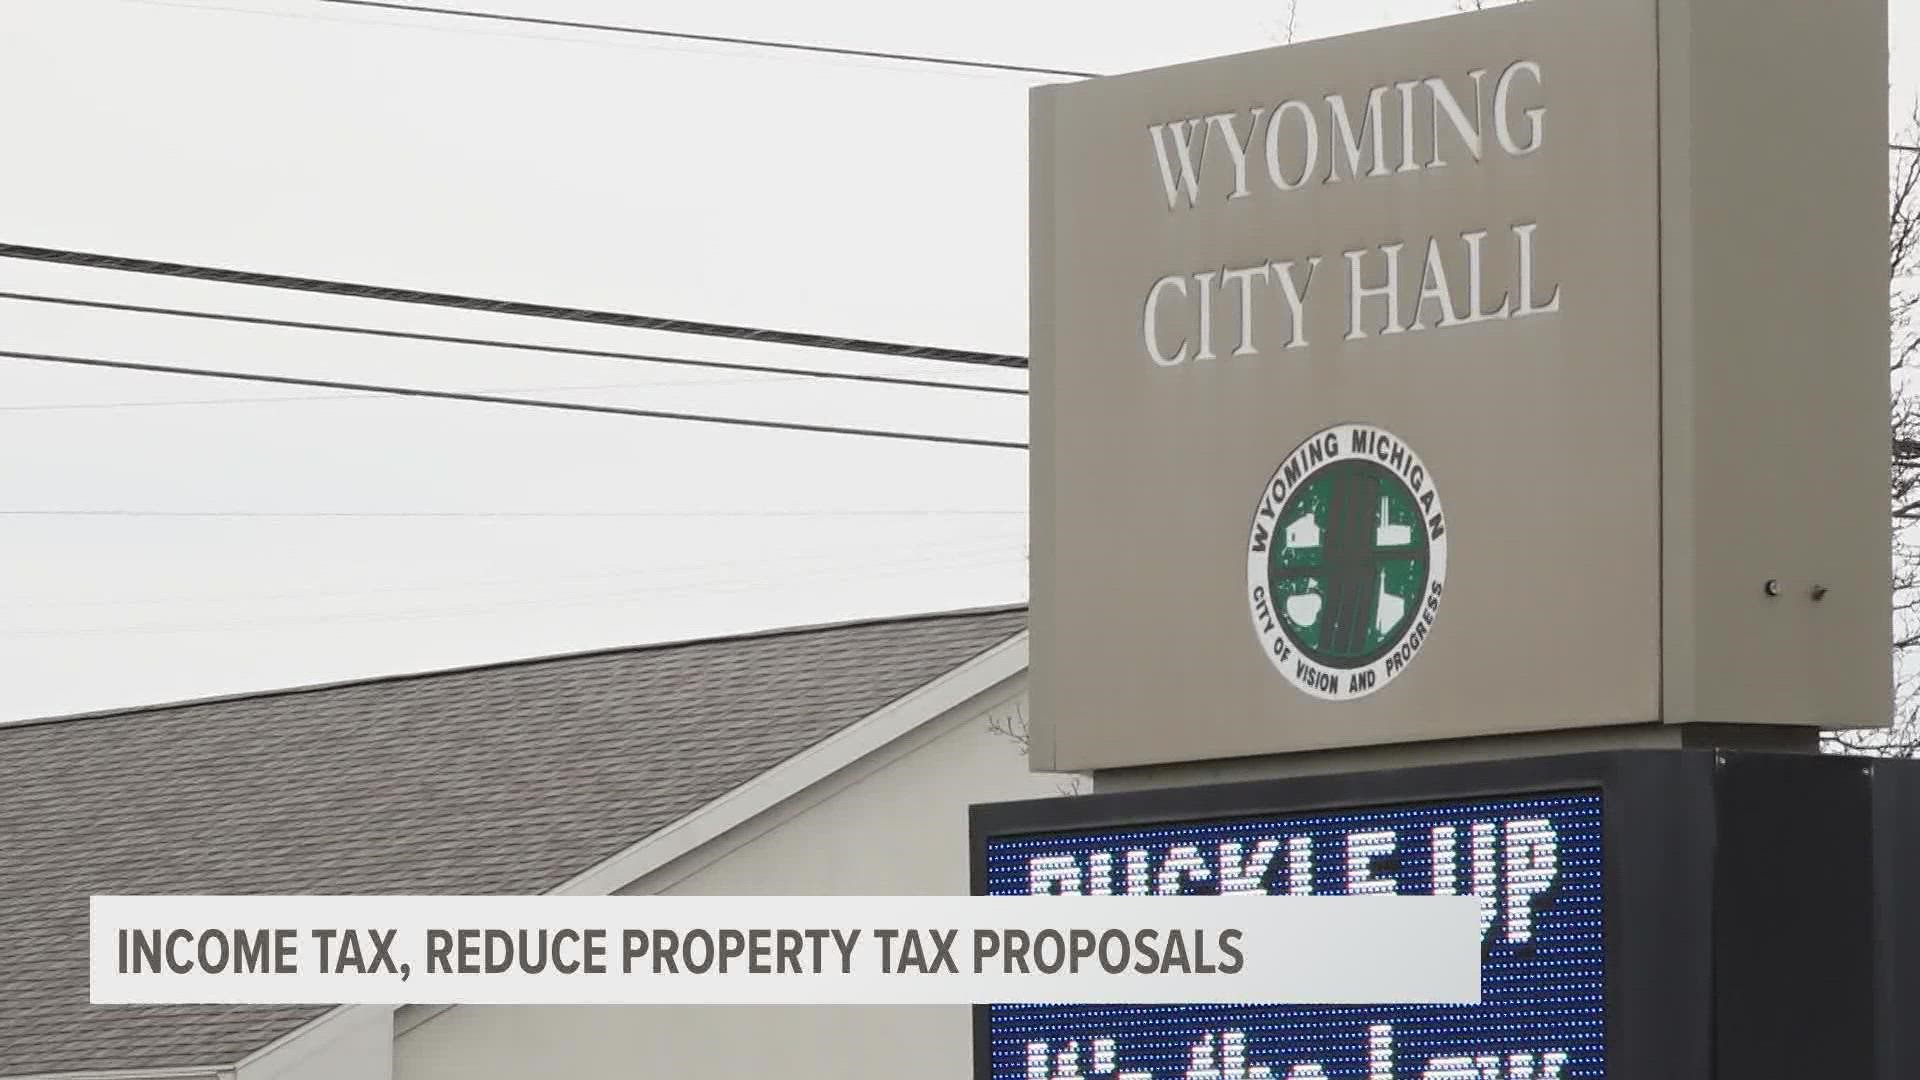 One proposal reduces the property tax millage by roughly 60% over two years. That creates a gap in funding, so the city is looking to levy income tax.